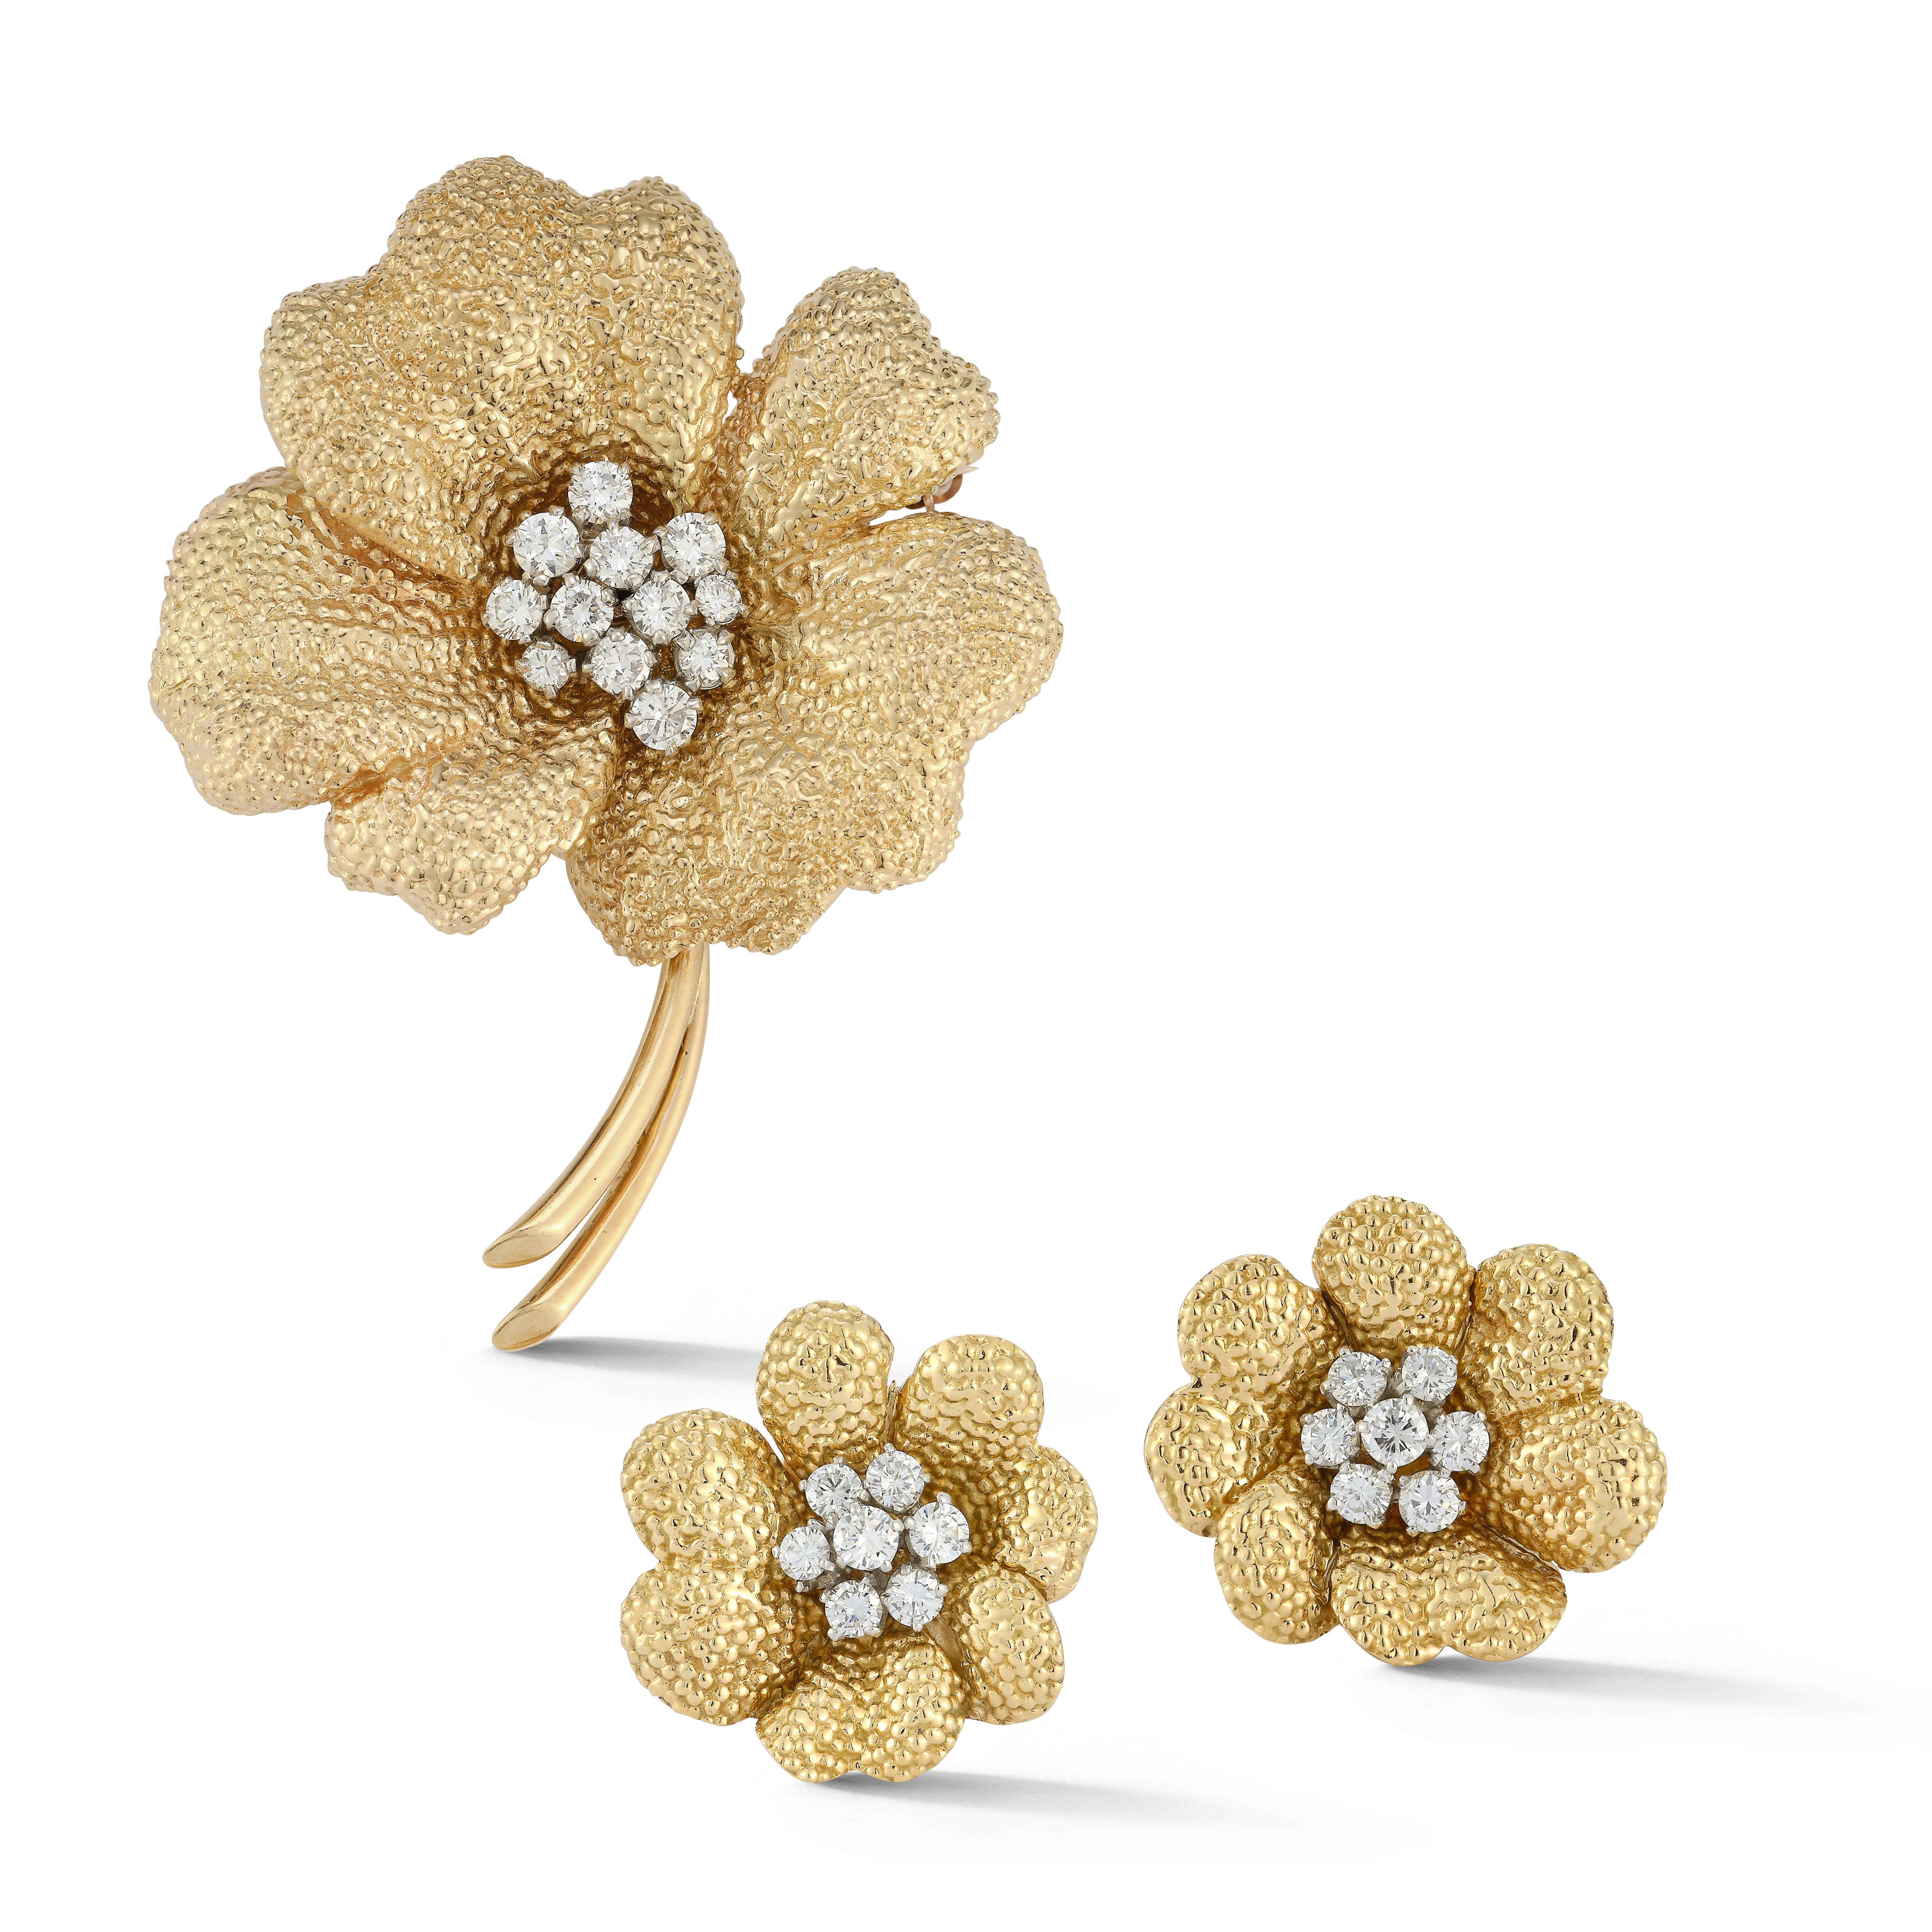 Van Cleef Diamond Flower Brooch & Earrings
 
Set with 12 diamonds clustered together as the center of the flower. Along with a pair of matching earrings set with 7 diamonds in the center of the flower set in 18 karat textured yellow gold.

Brooch